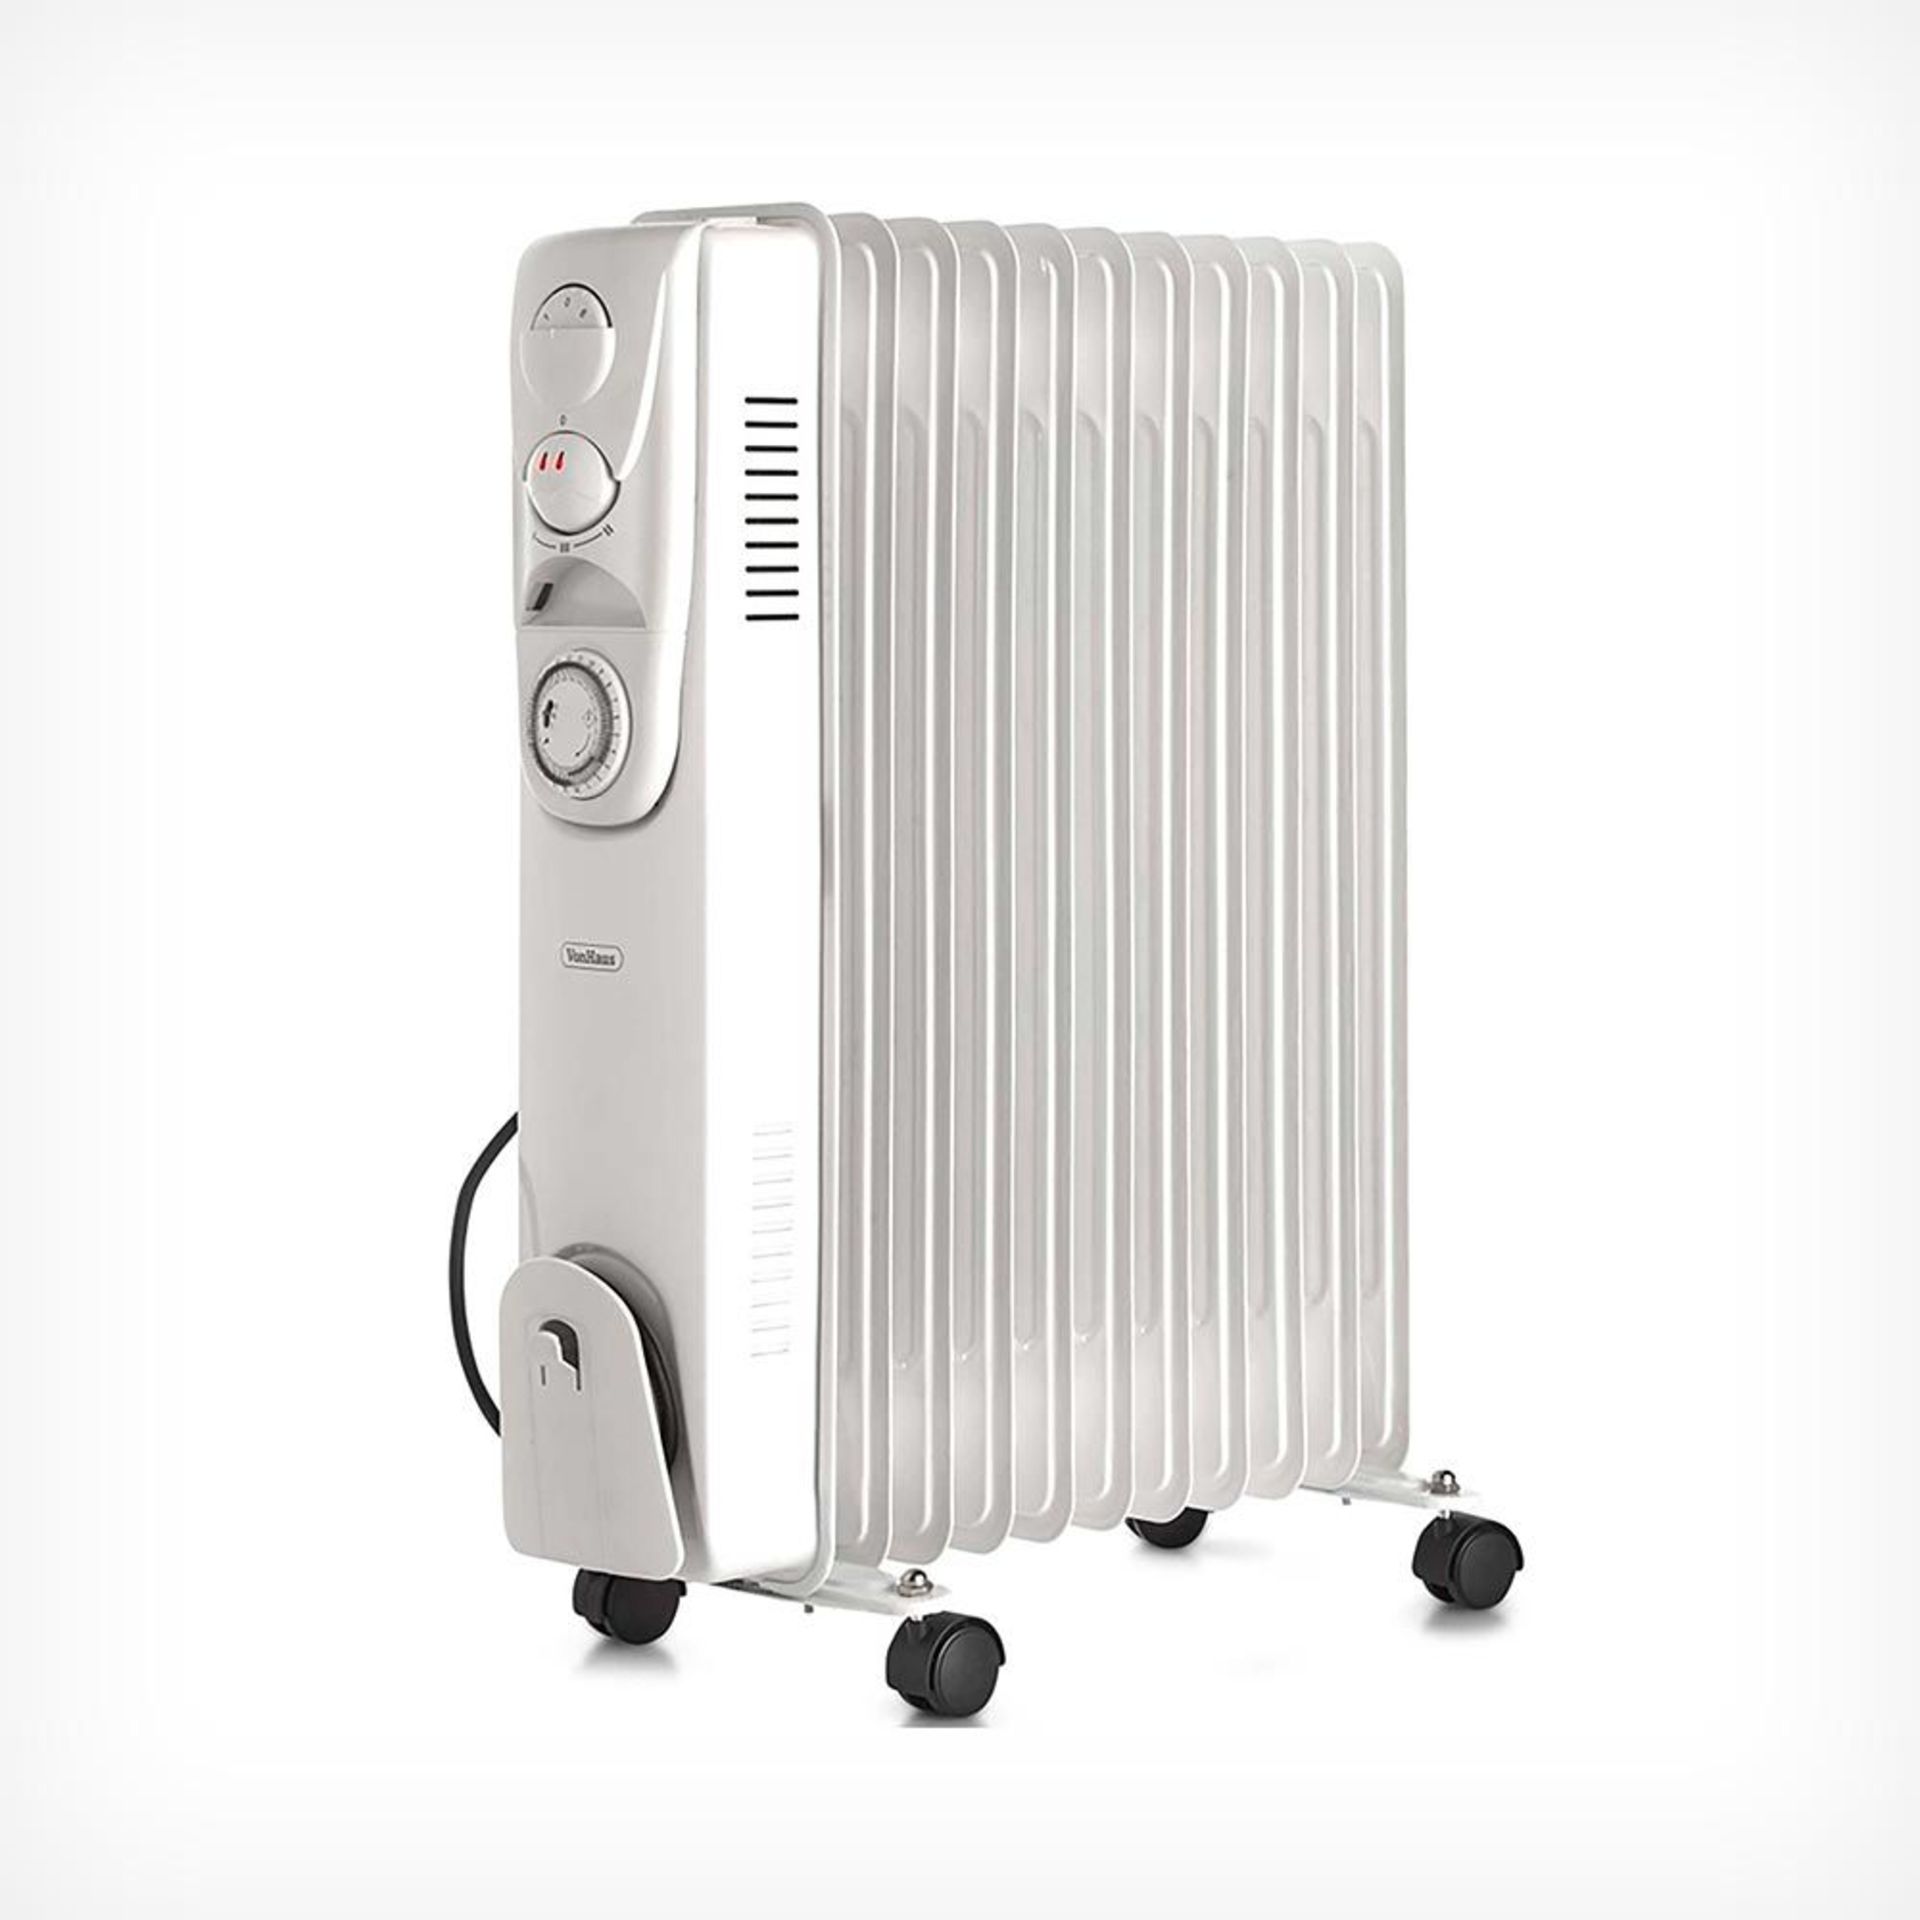 11 Fin 2500W Oil Filled Radiator - White 2500W radiator with 11 oil-filled fins for heating mid to